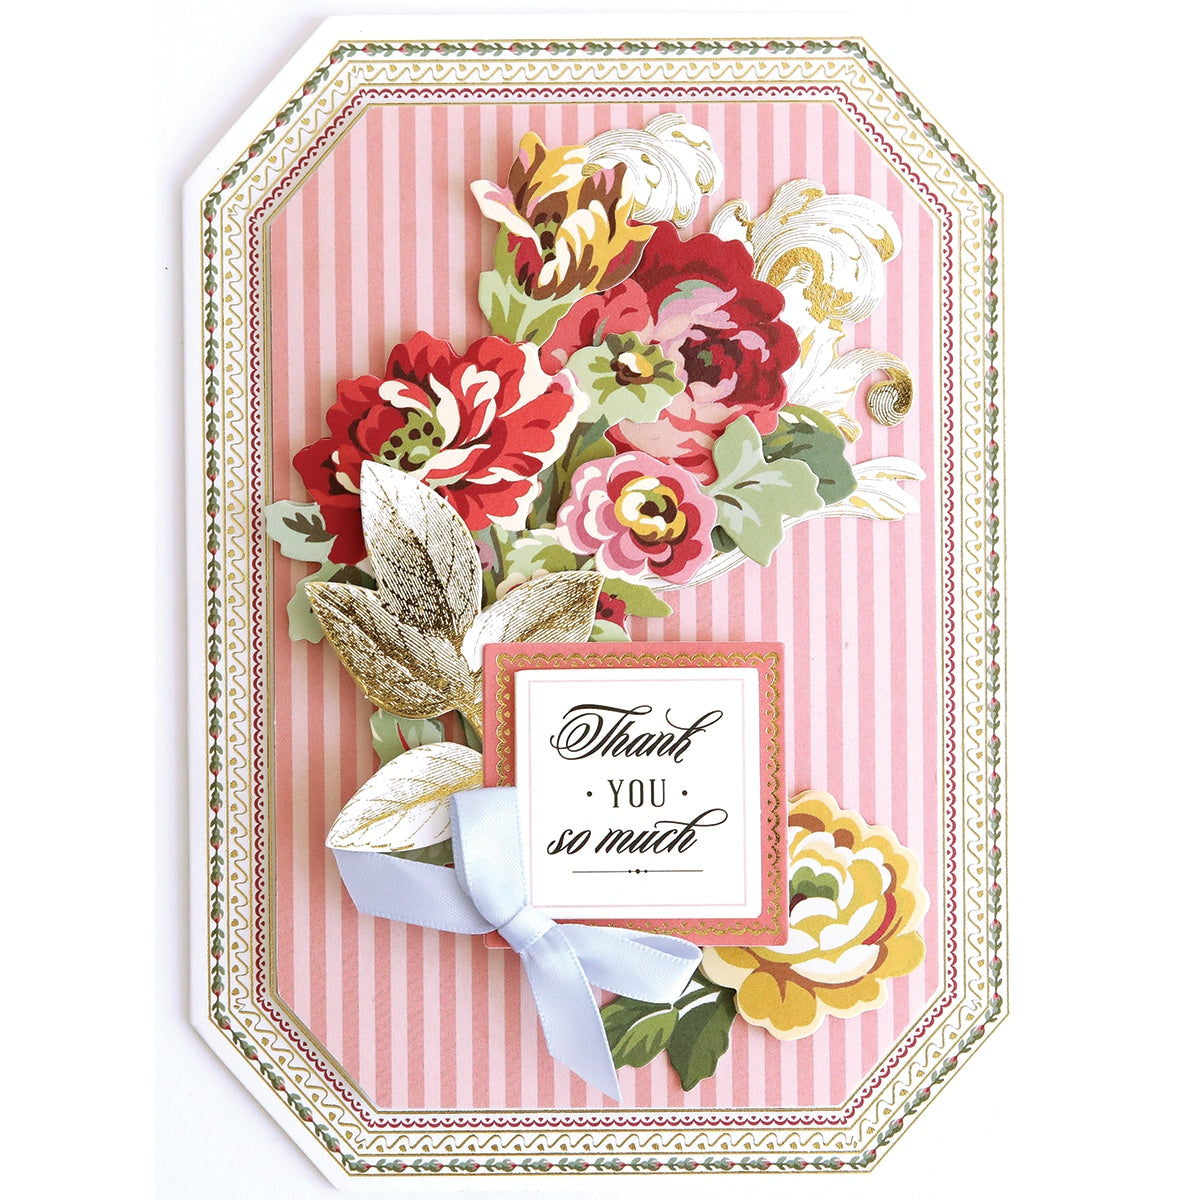 A Simply Gratitude Card Making Kit with flowers and a ribbon.